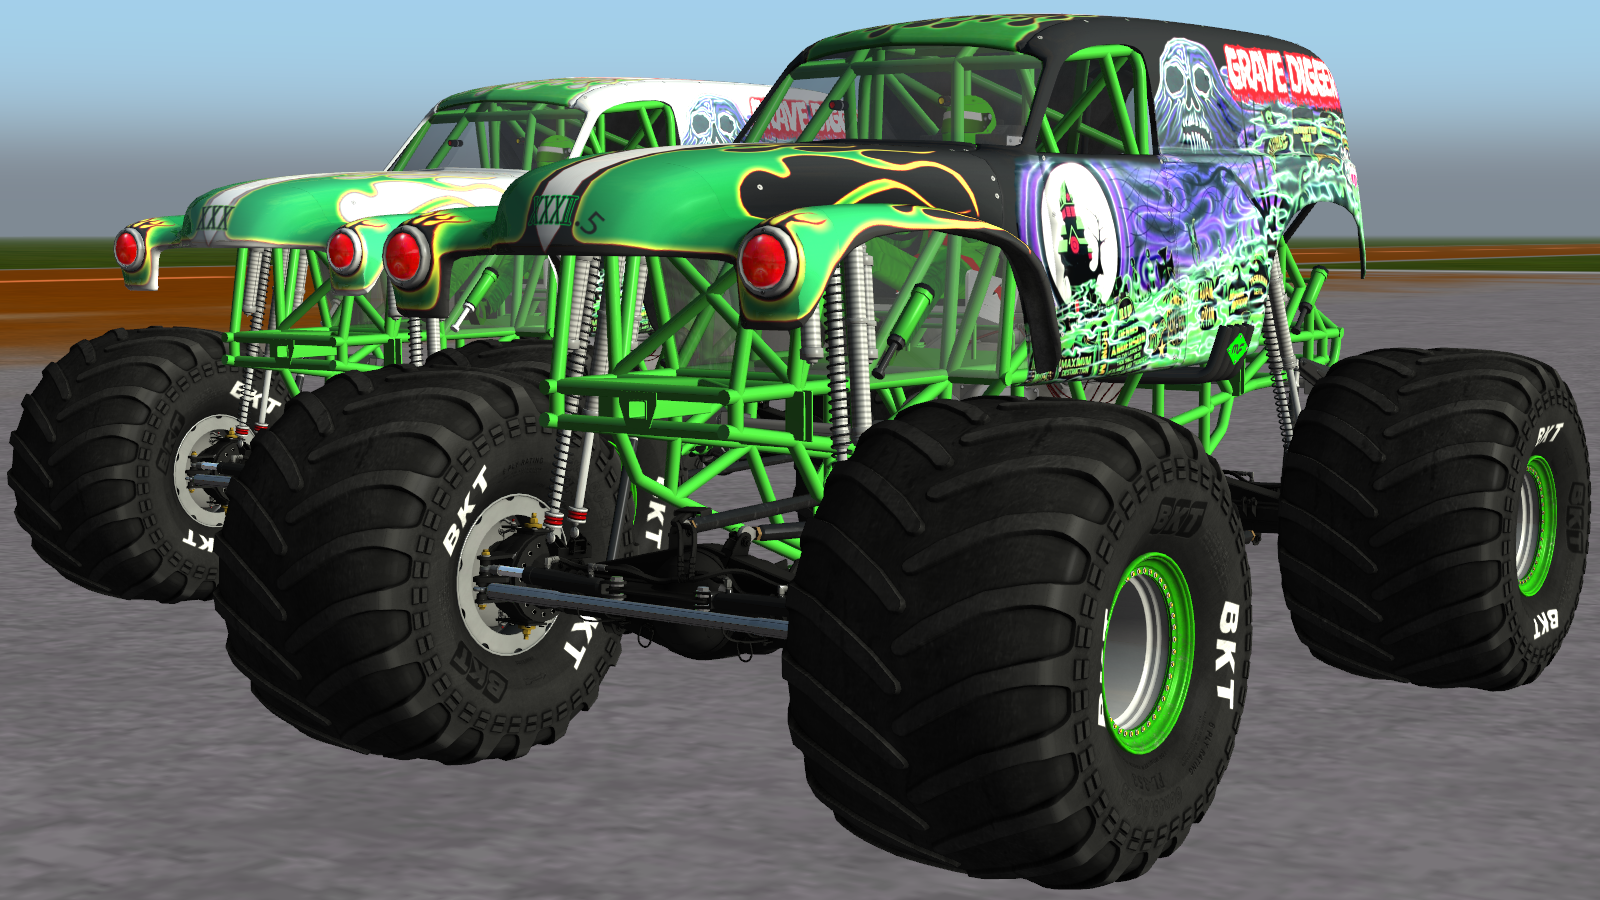 More information about "Grave Digger 32 2016"